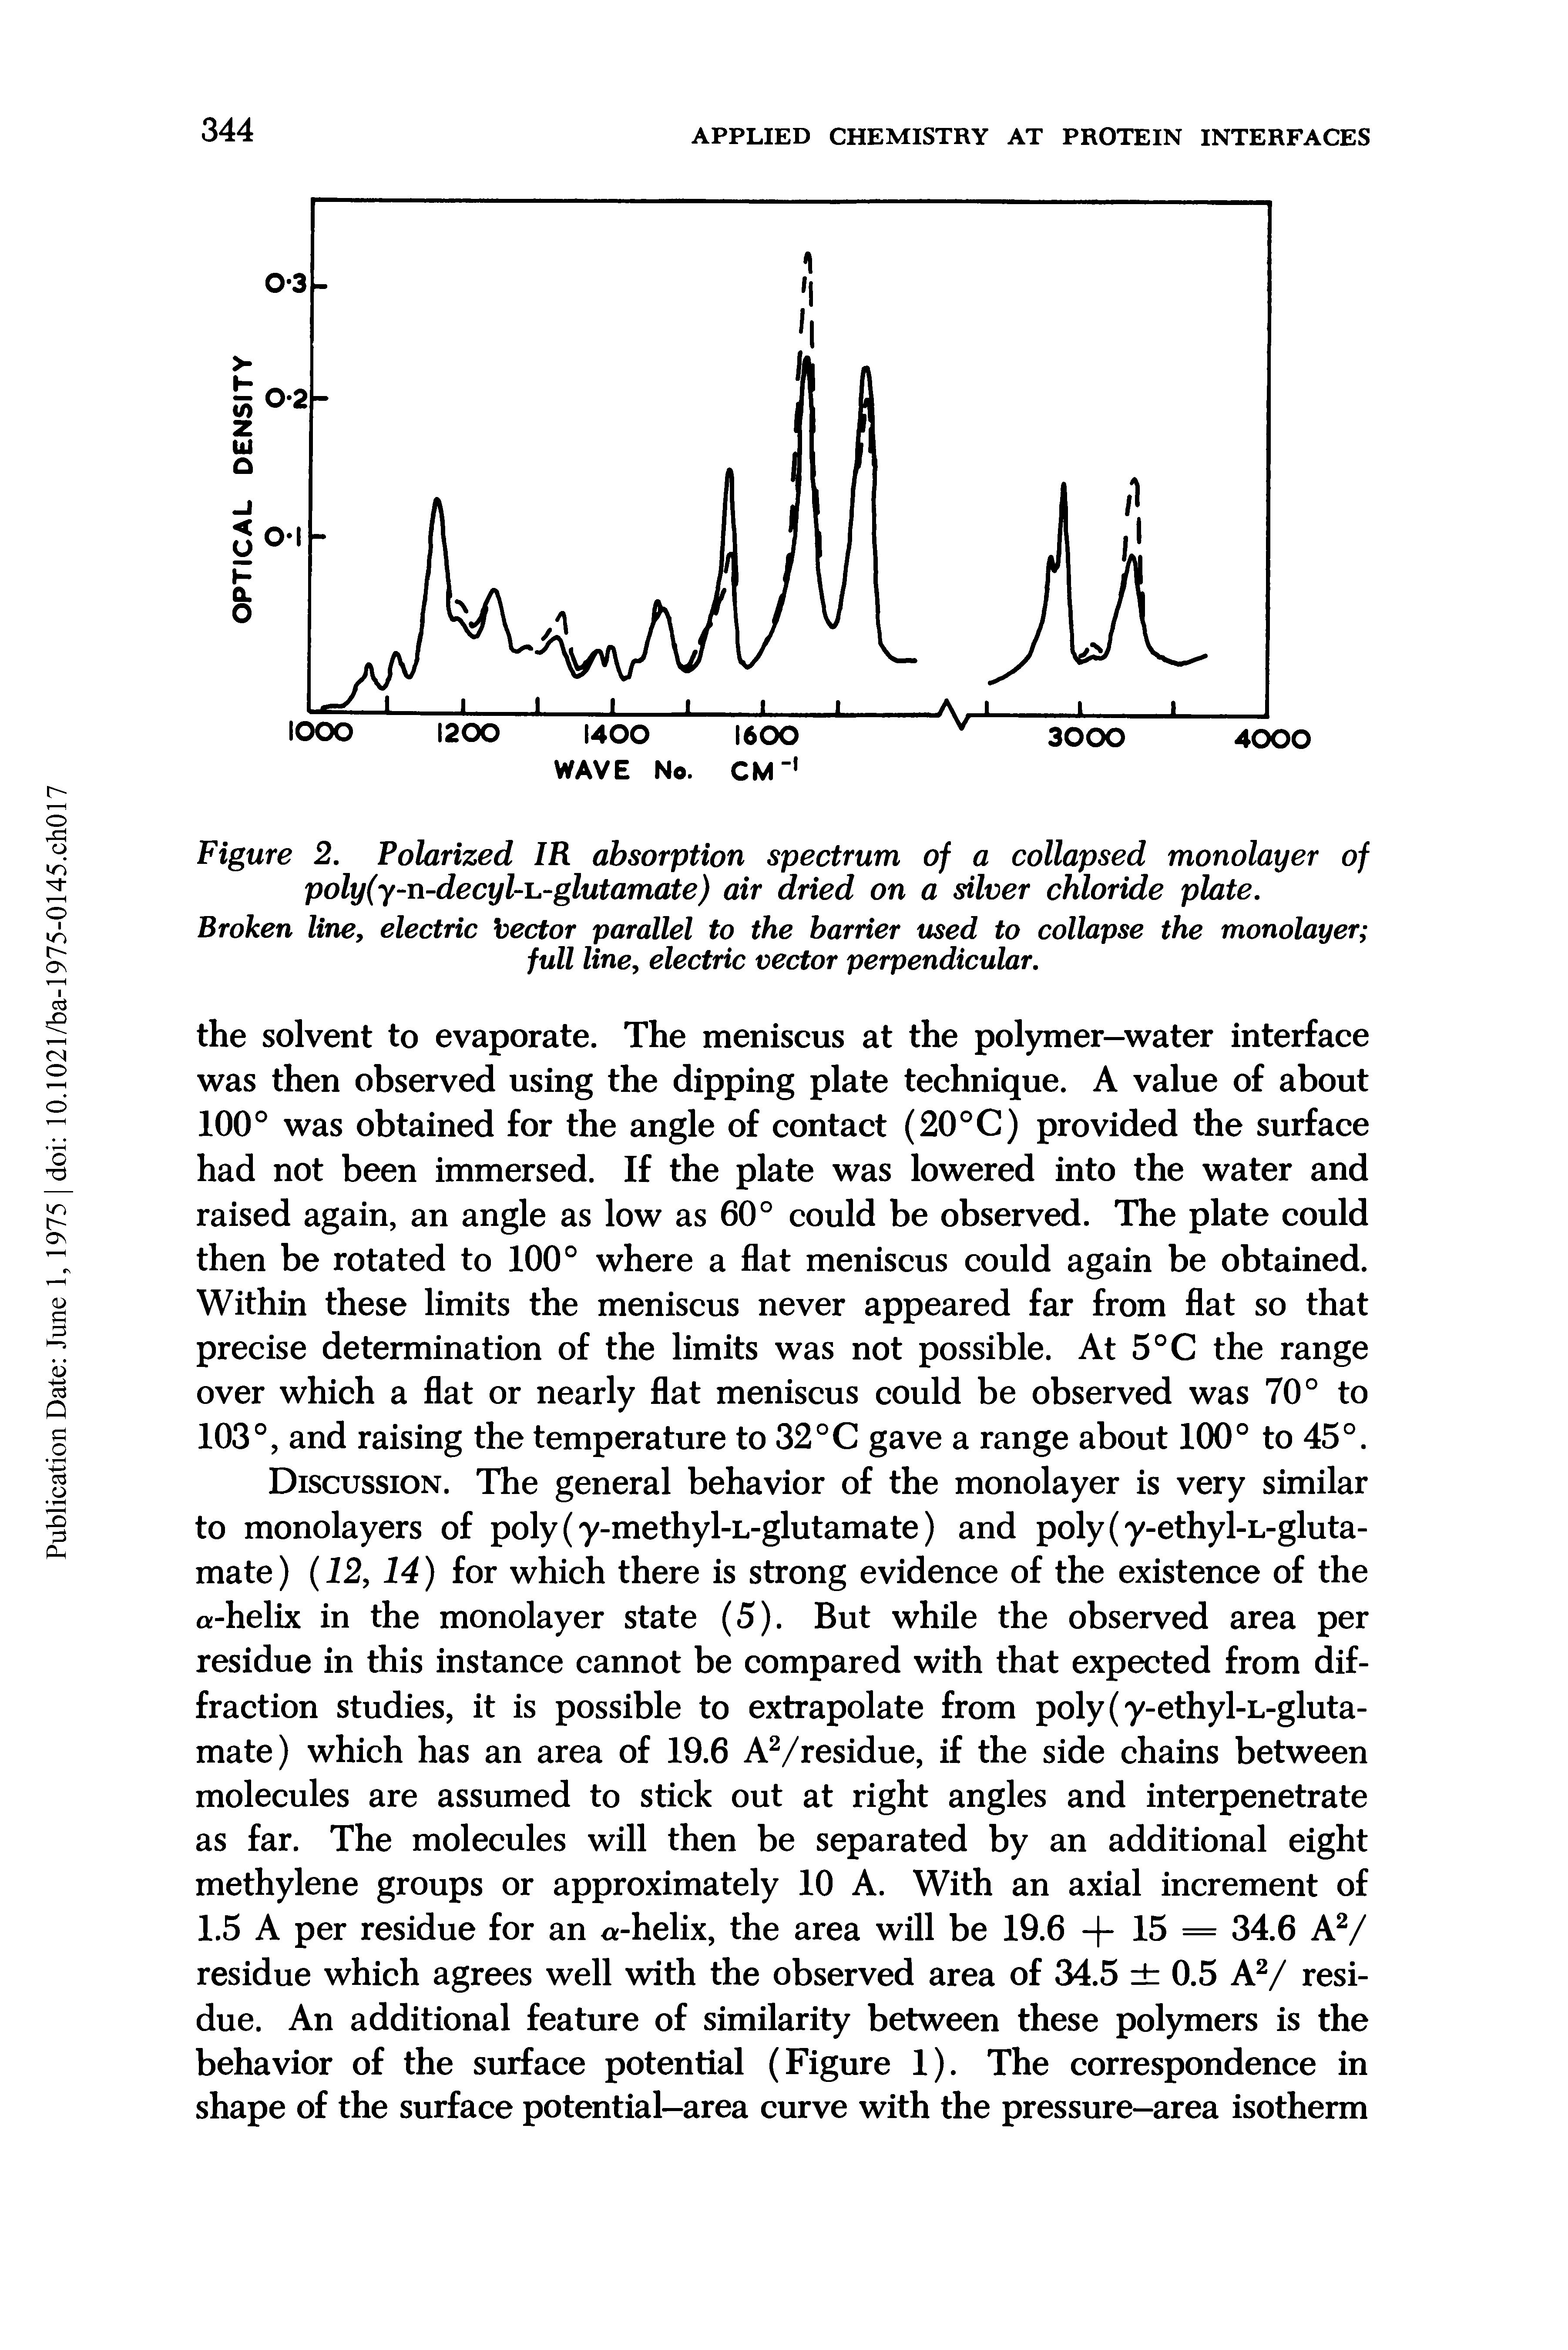 Figure 2. Polarized IR absorption spectrum of a collapsed monolayer of poly(y-n-decyl-i.-glutamate) air dried on a silver chloride plate.